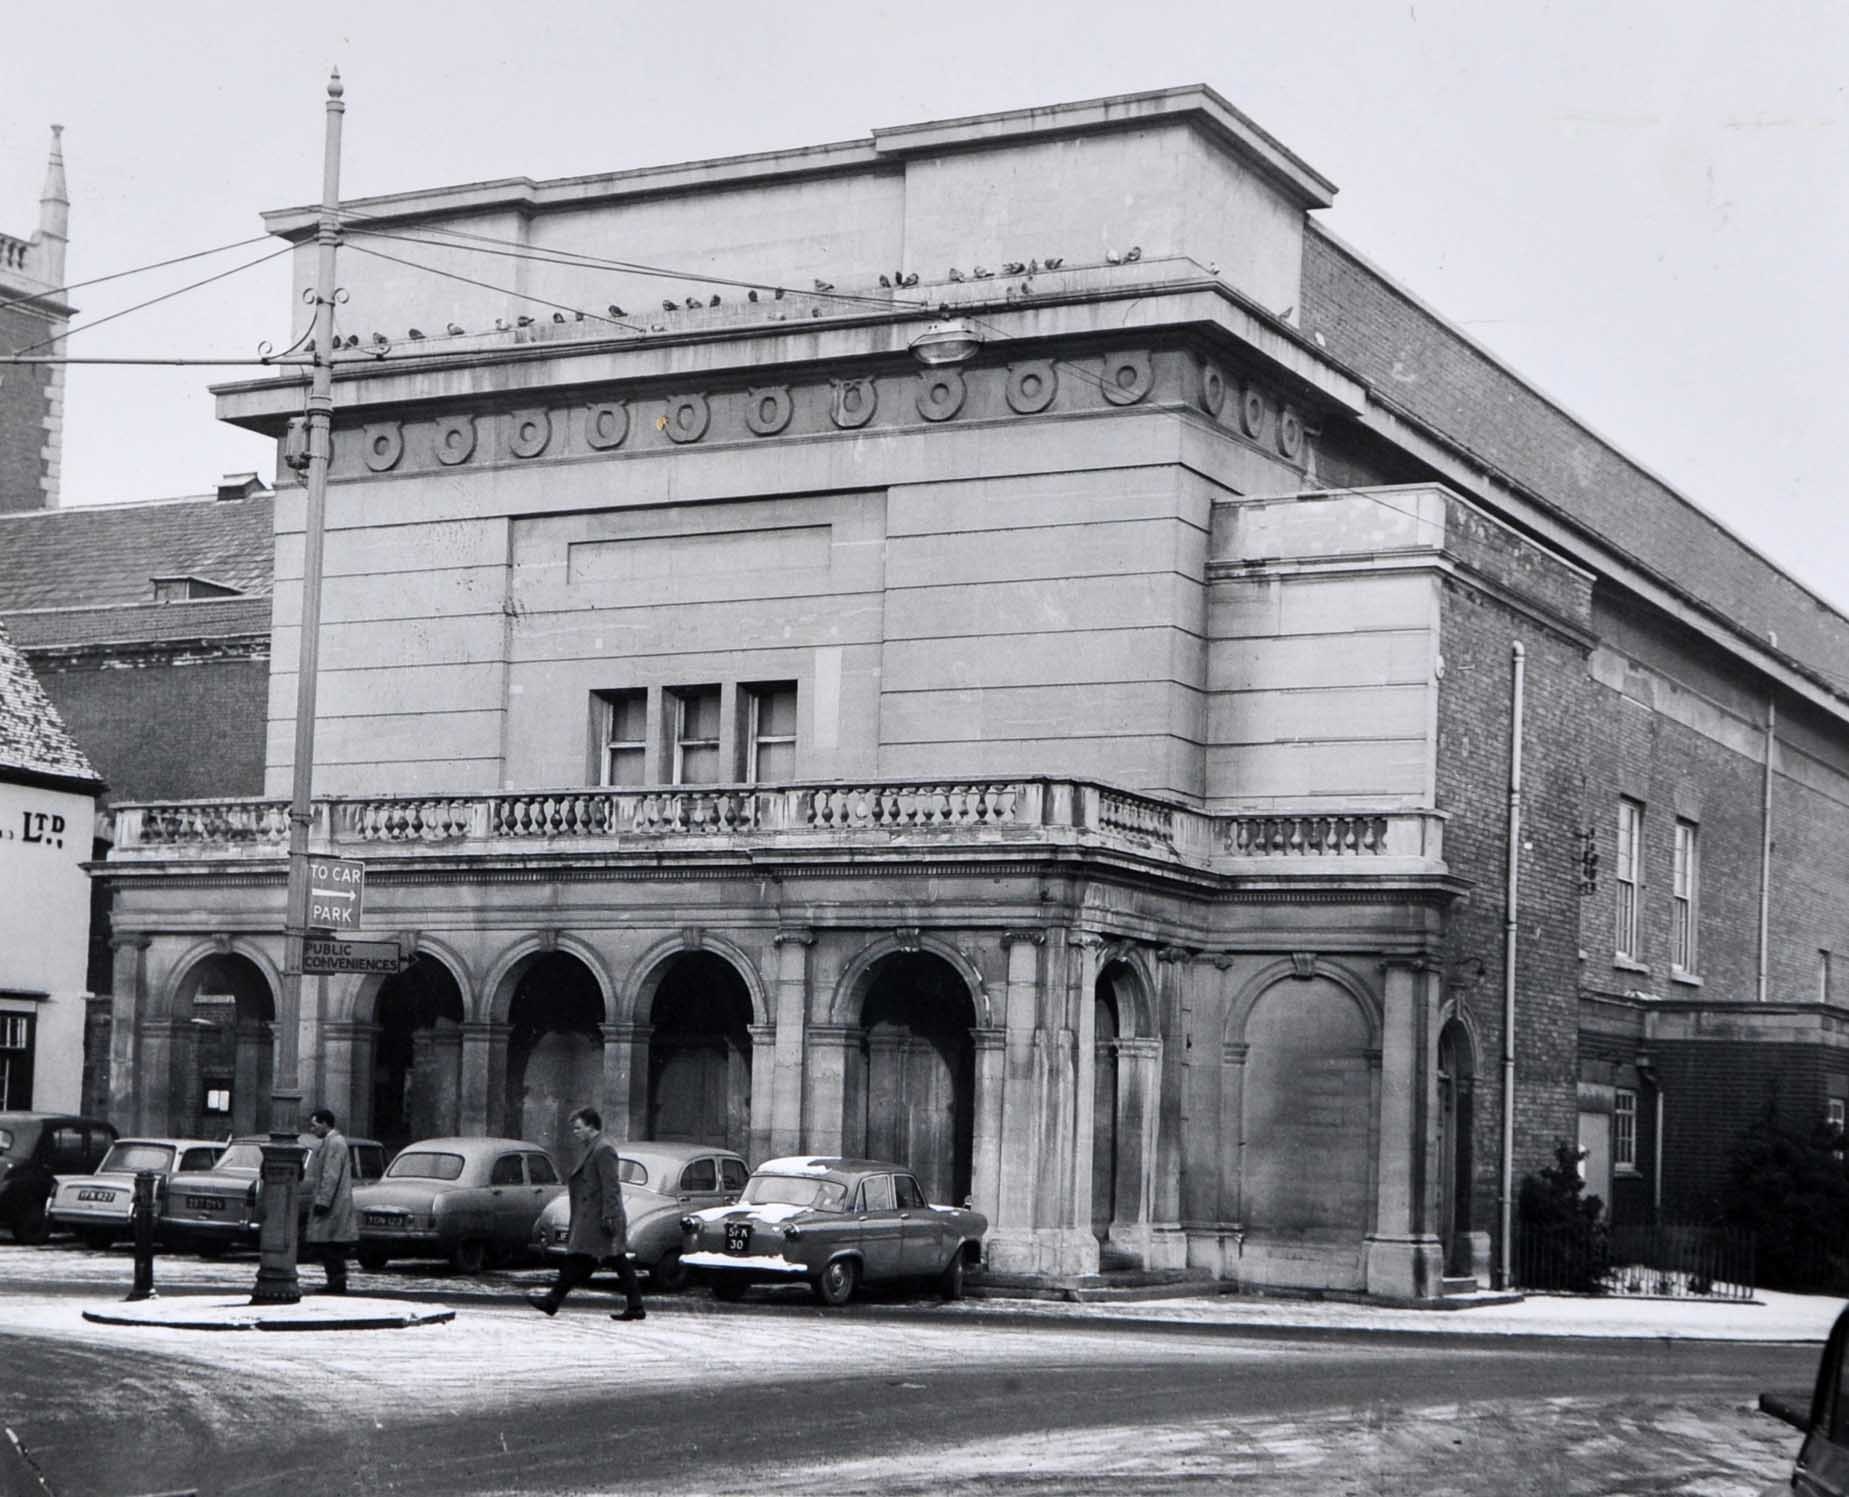 Worcester’s Public Hall was built on the north side of the Cornmarket, on the side of the old Wheatsheaf Inn. It was eventually demolished in 1966 to make more room for car parking